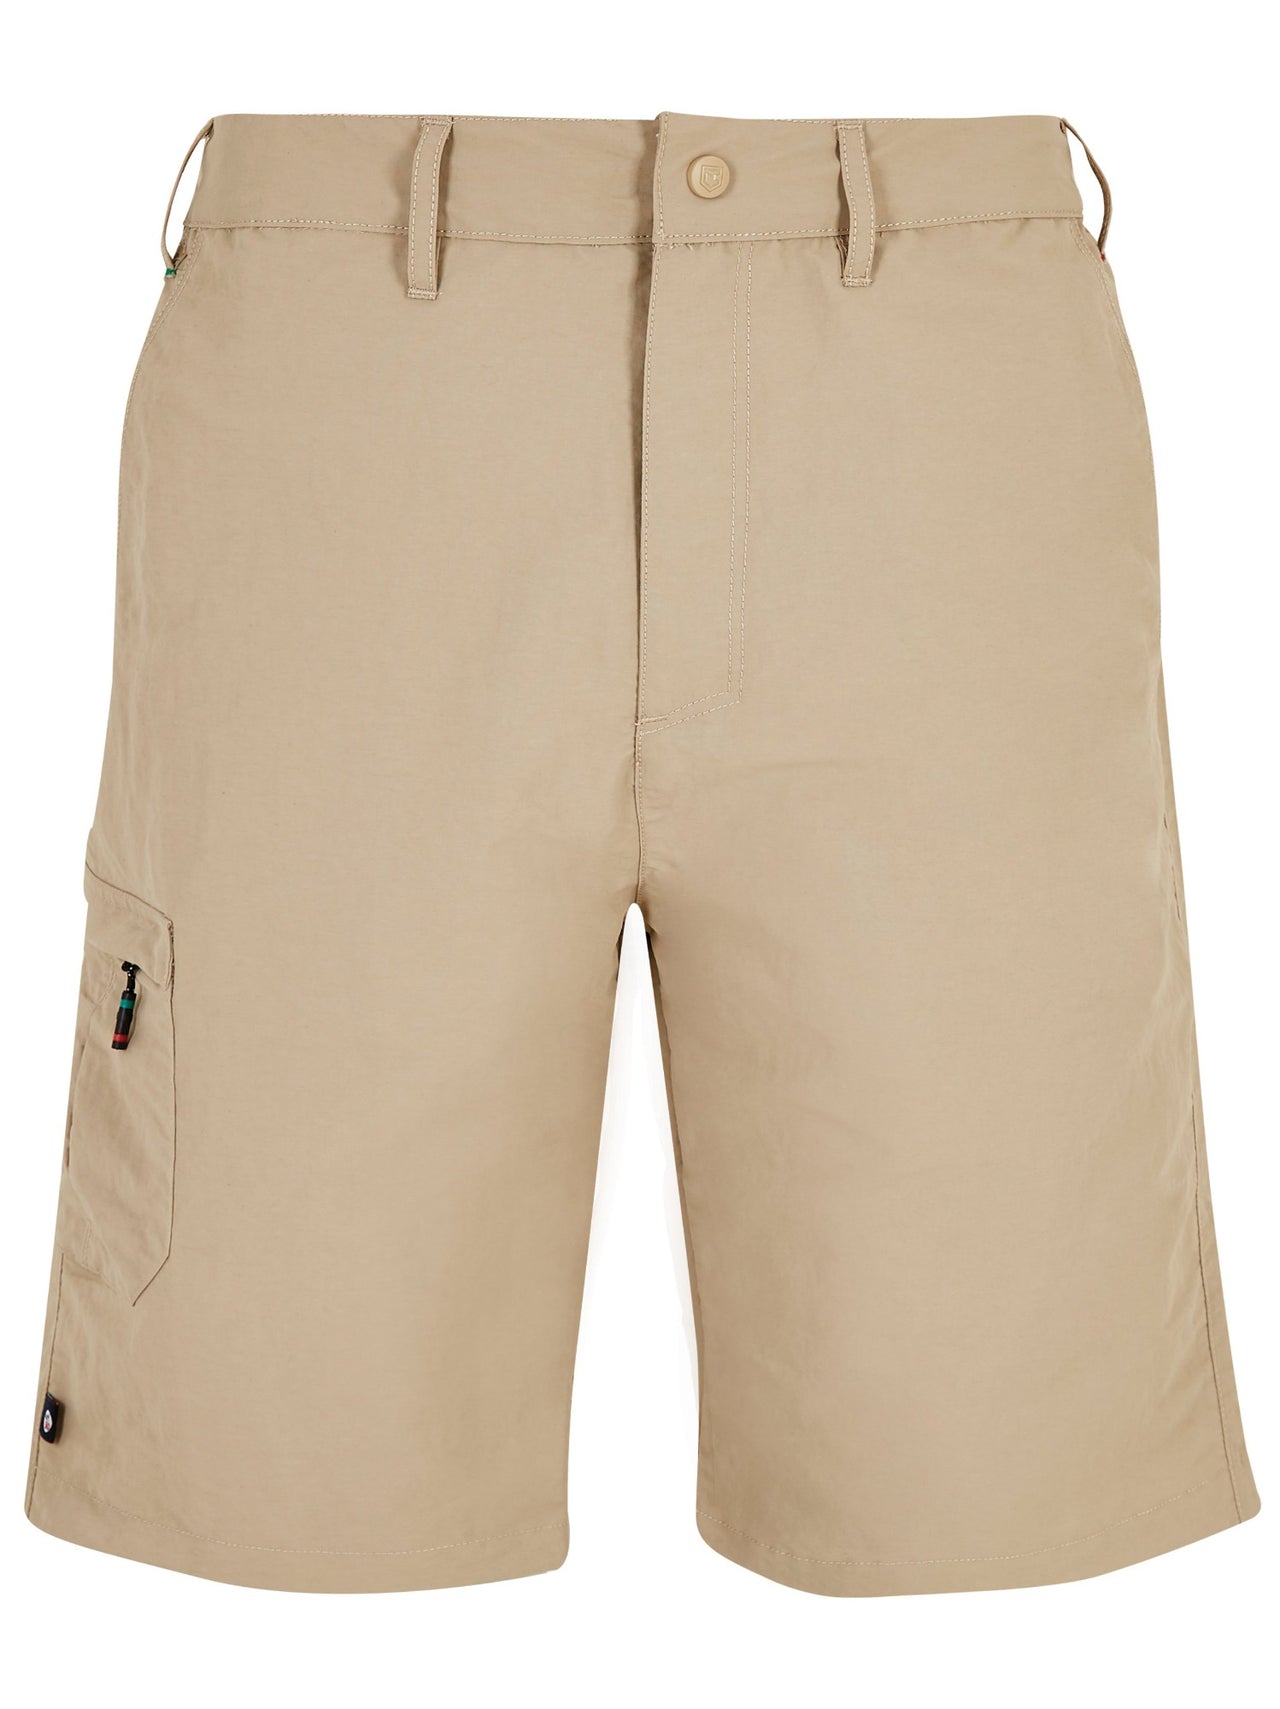 DUBARRY Mens Cyprus Fast Dry Crew Shorts LIGHT STONE (Online only*)